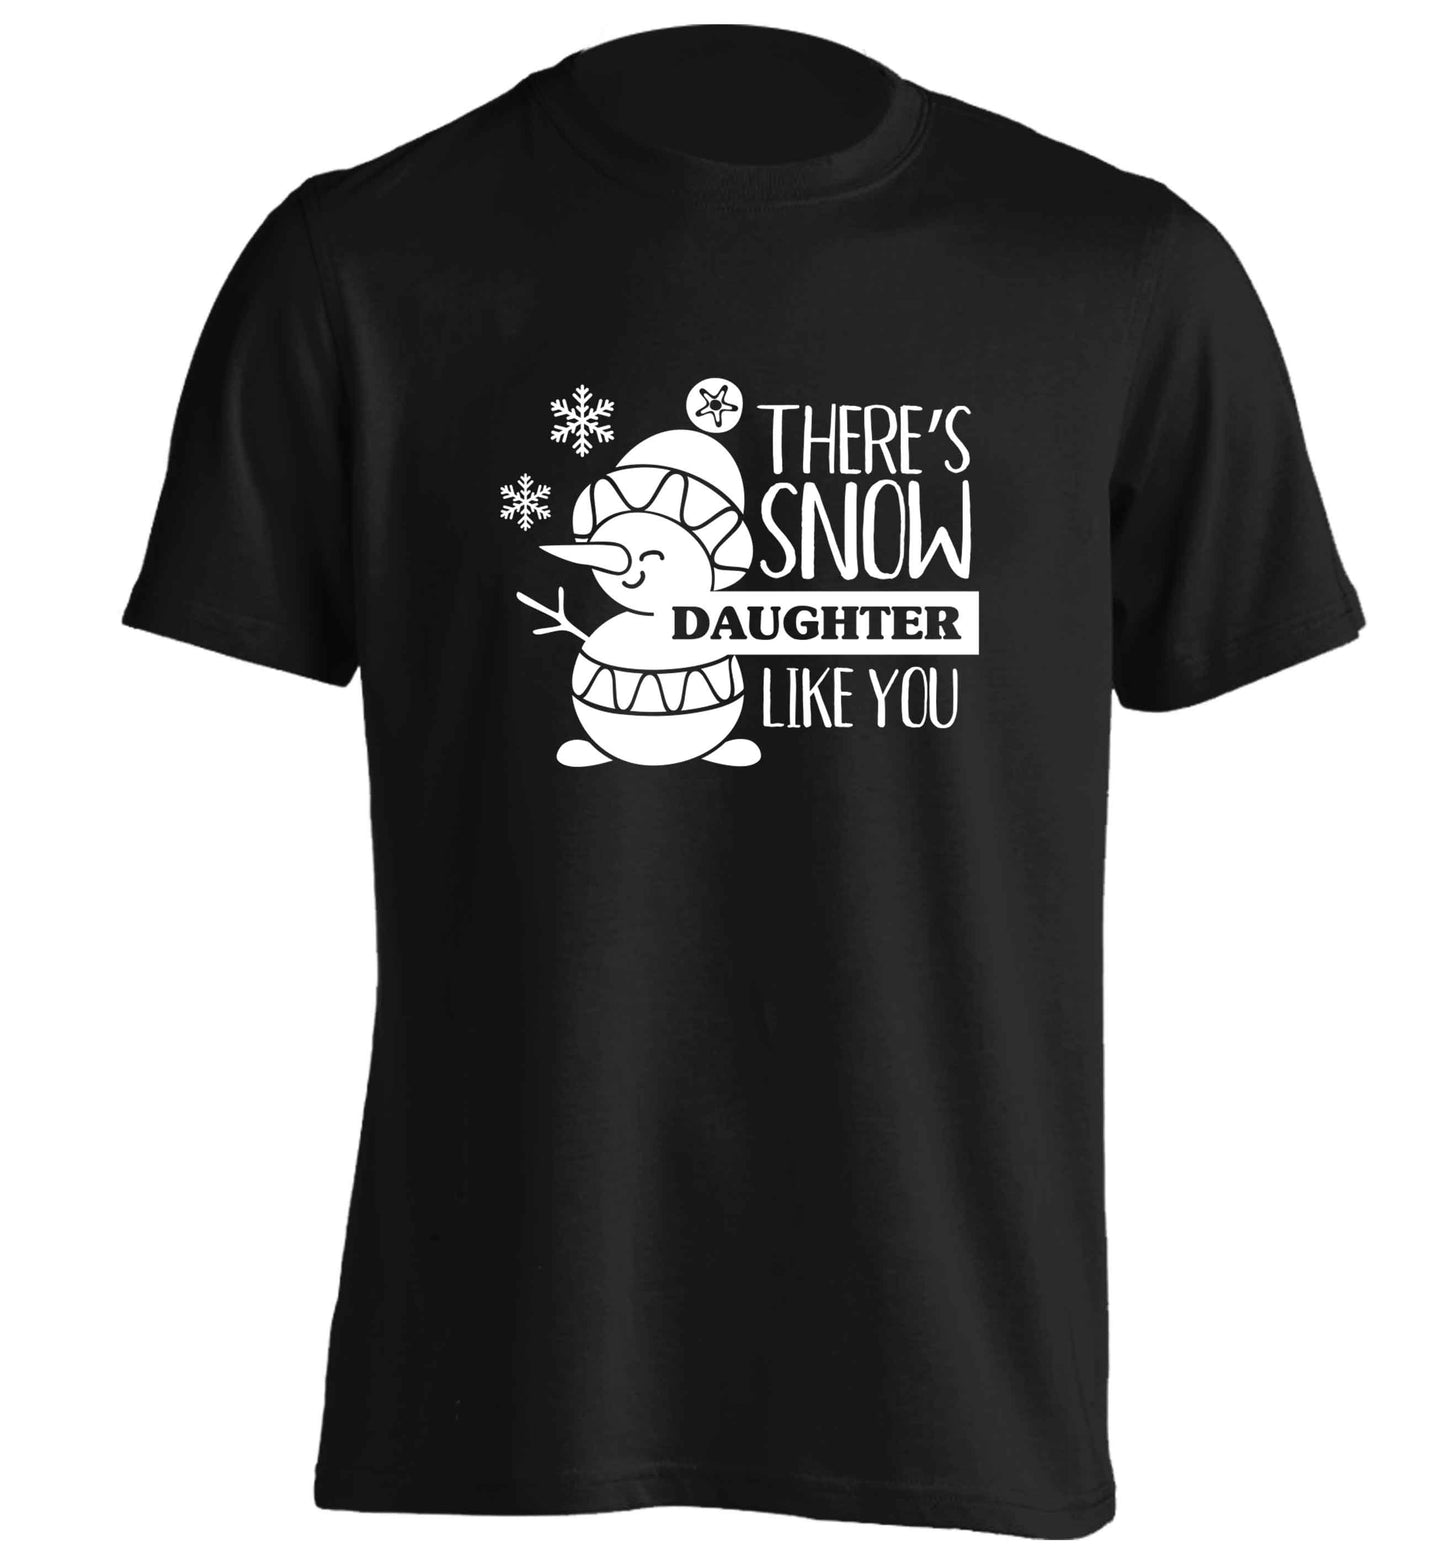 There's snow daughter like you adults unisex black Tshirt 2XL